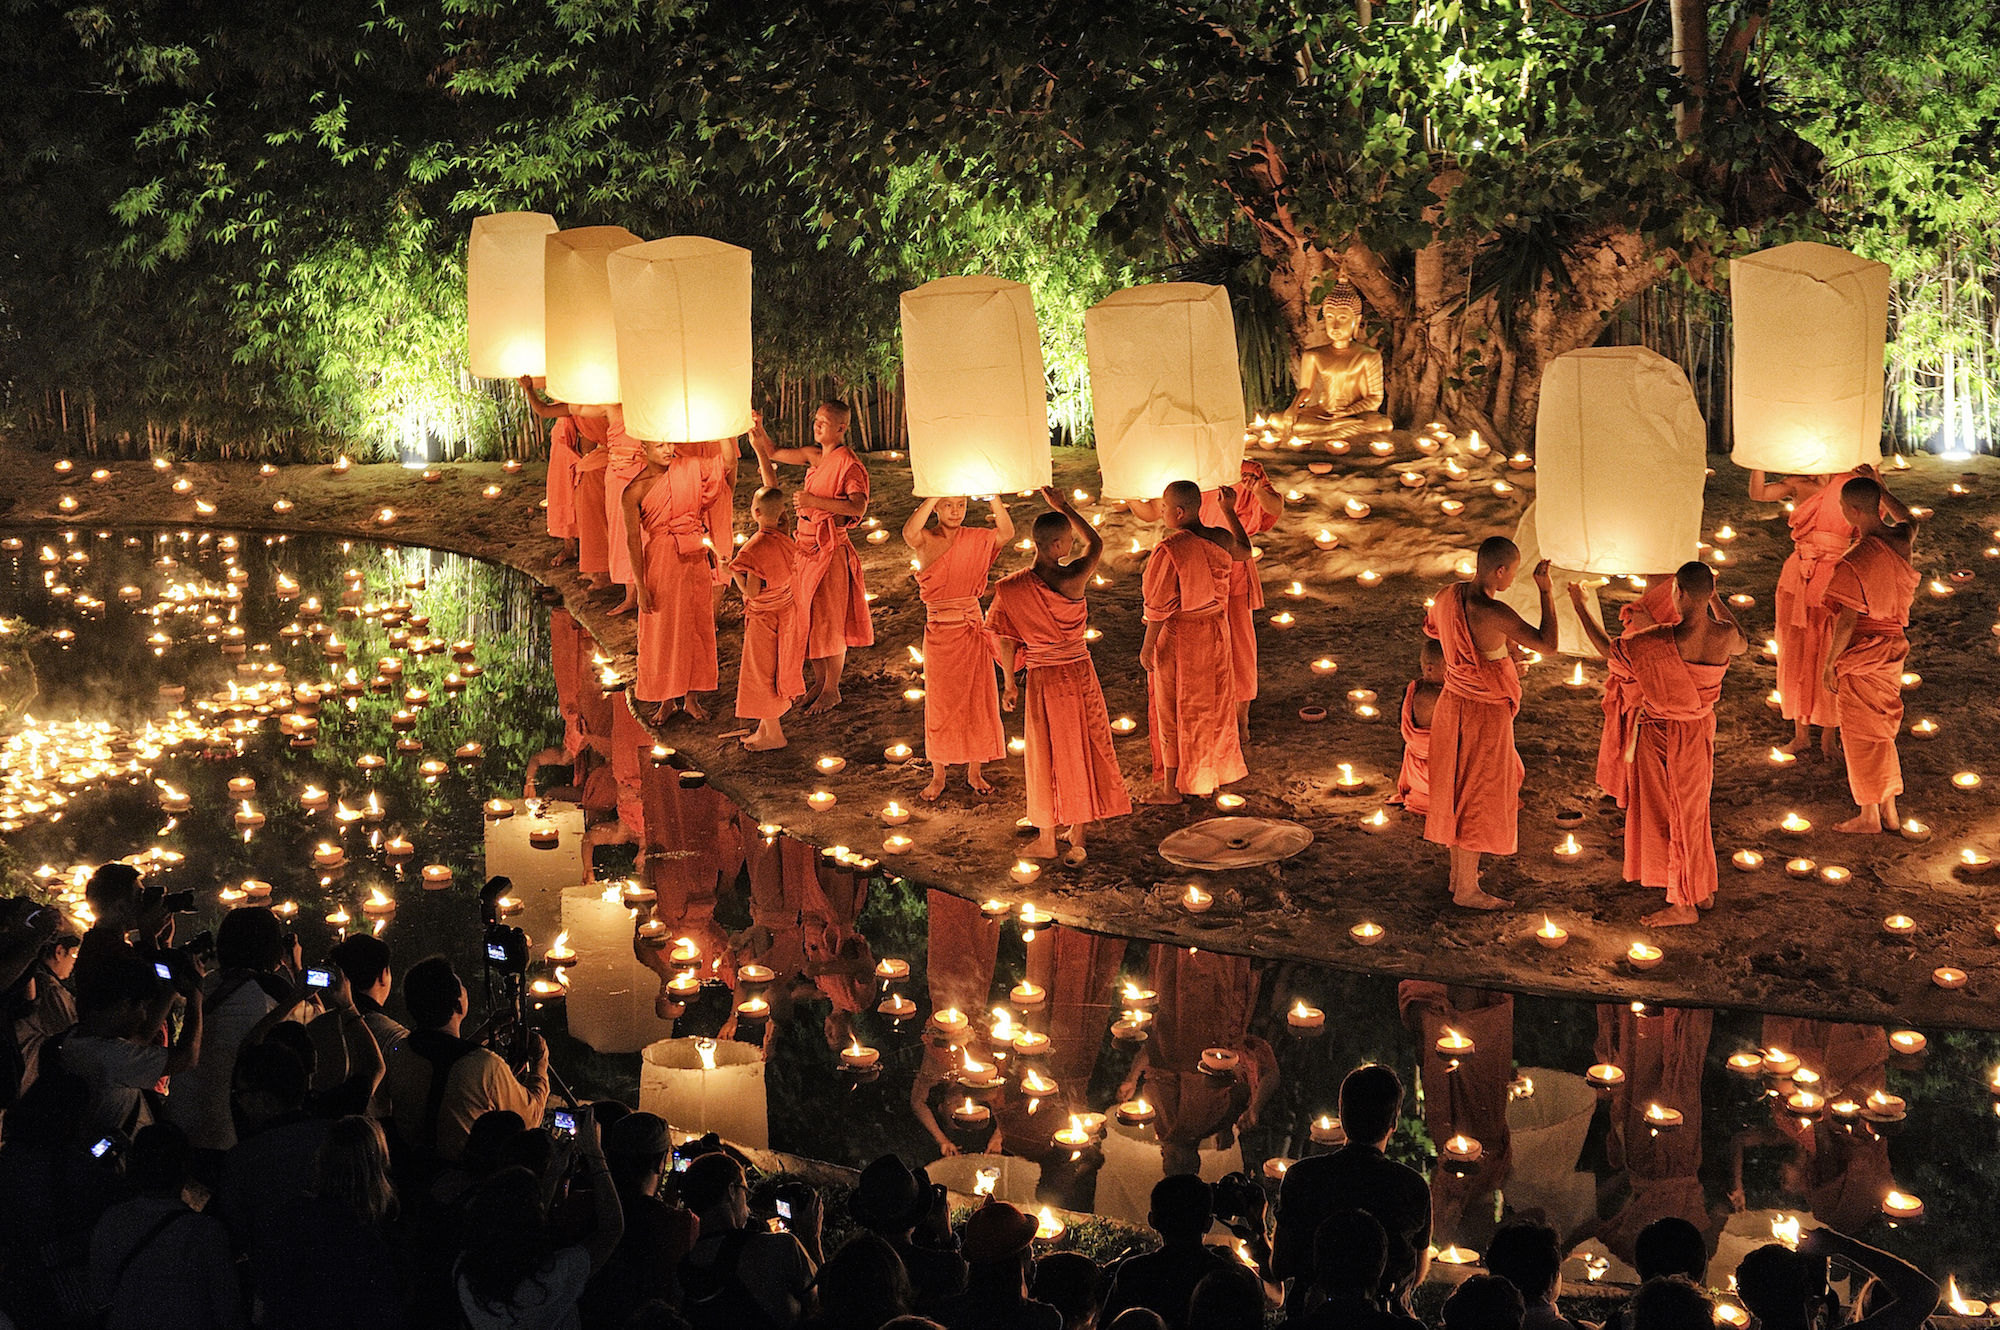 How to spend a whirlwind weekend in Chiang Mai